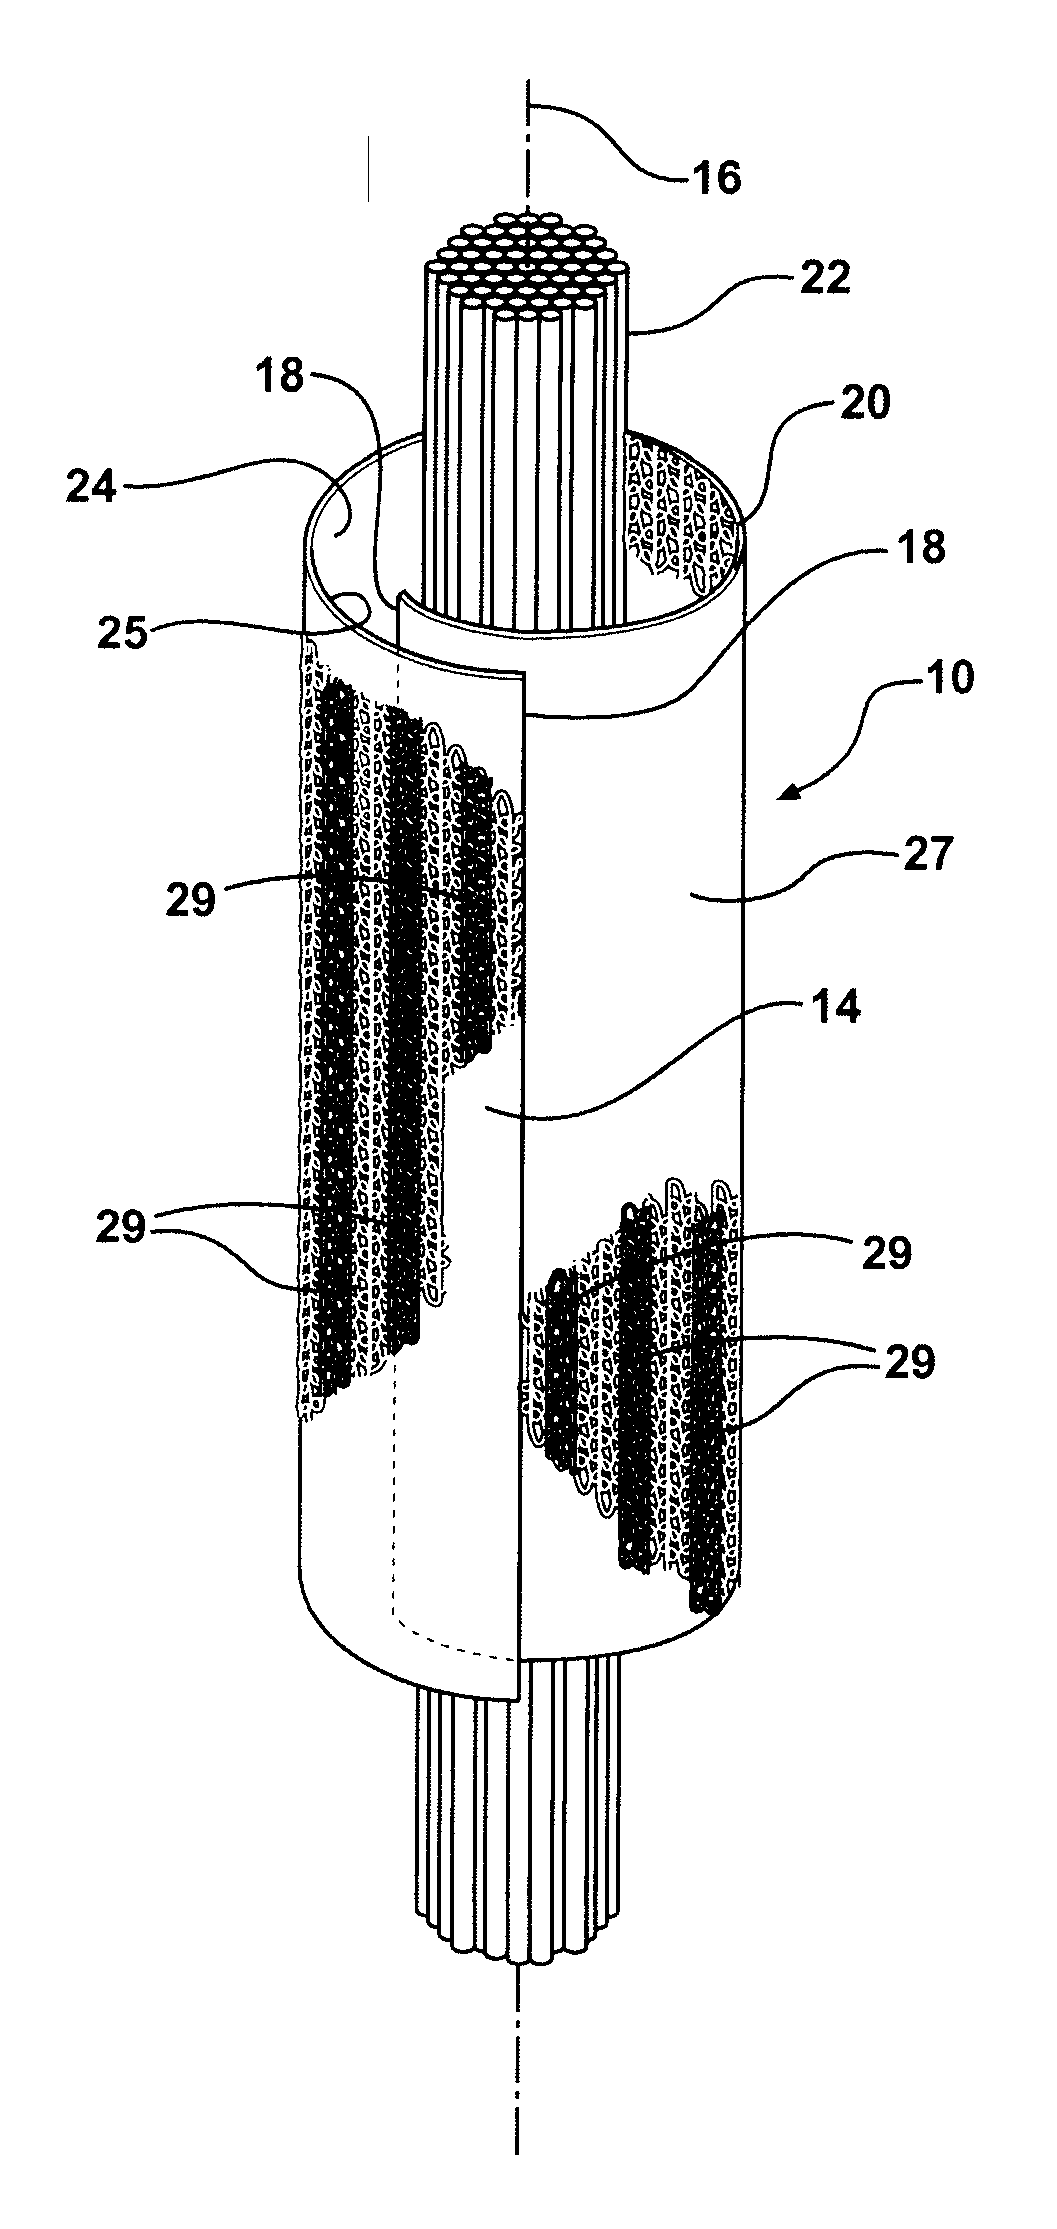 Self-curling knitted sleeve and method of fabrication